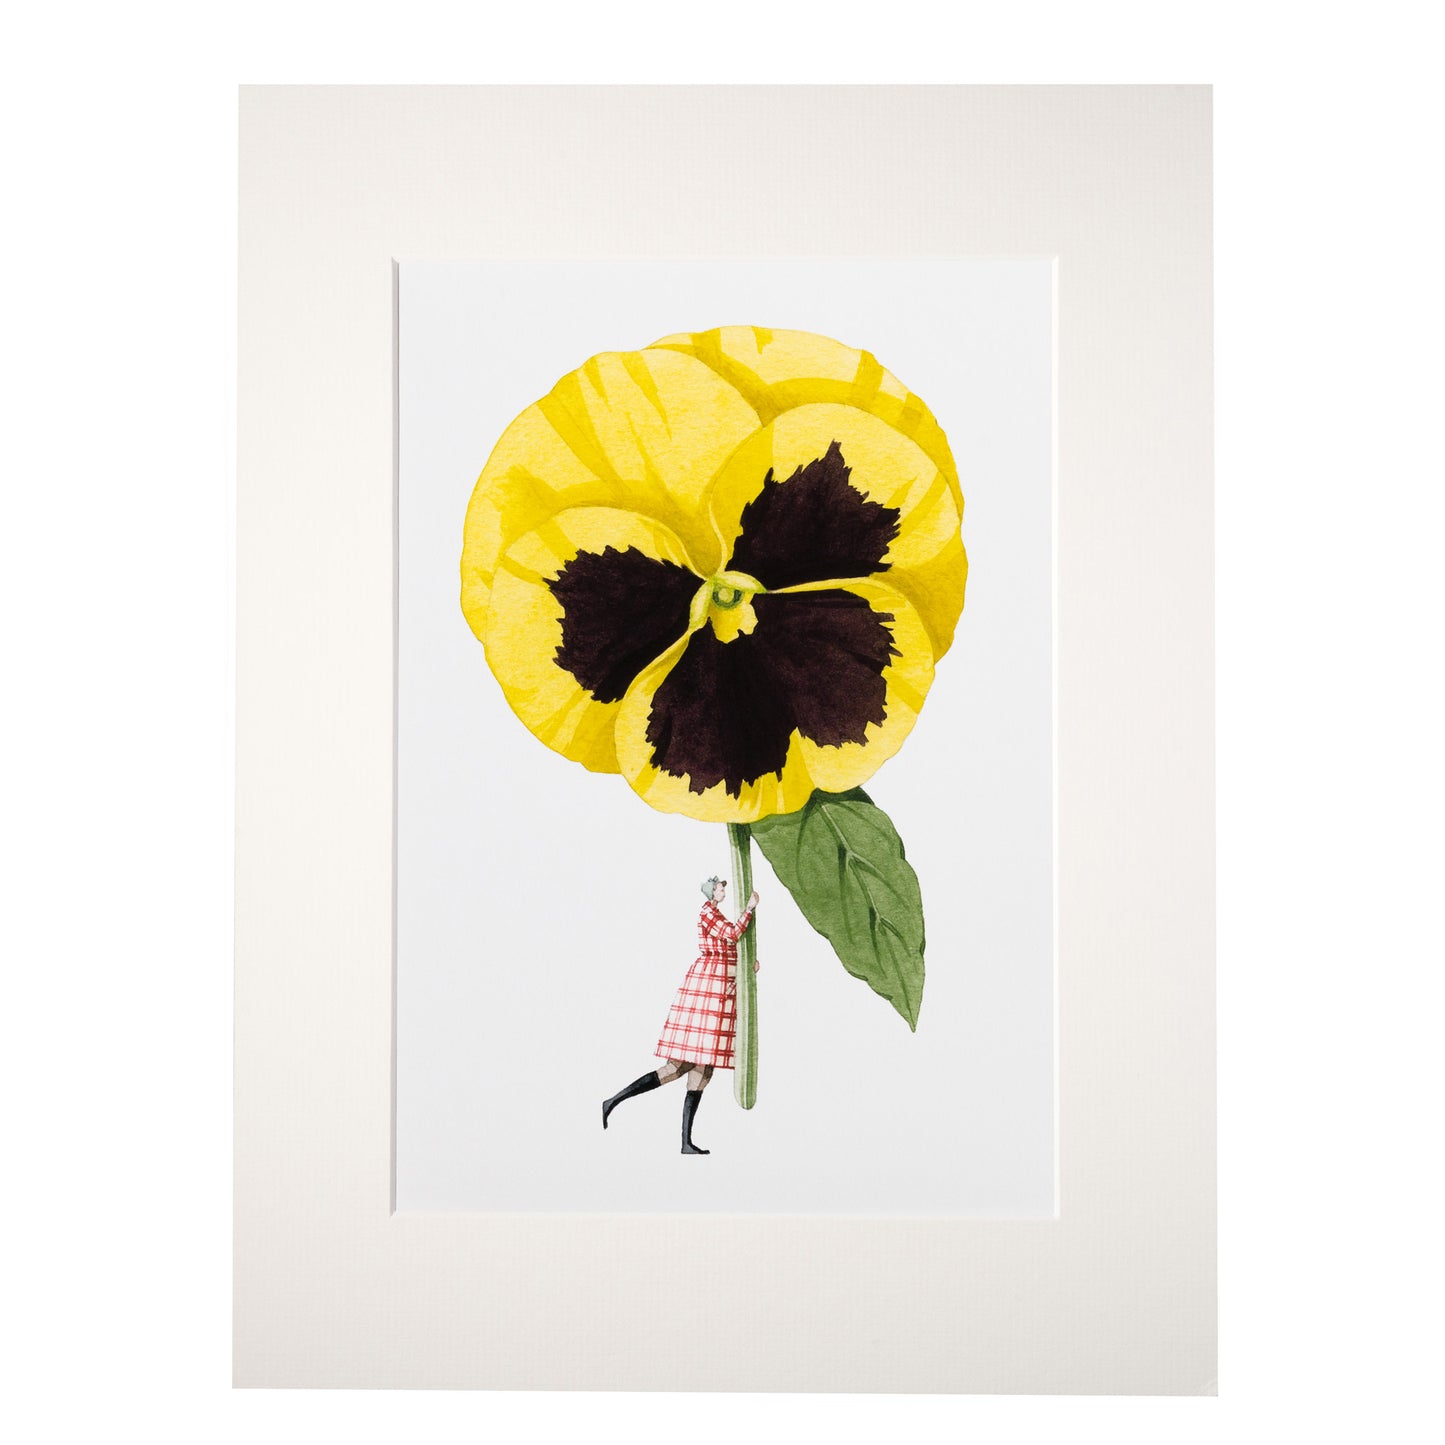 giclee print, mounted print, print, pansy, illustration, made in england, flowers, archival paper, art print